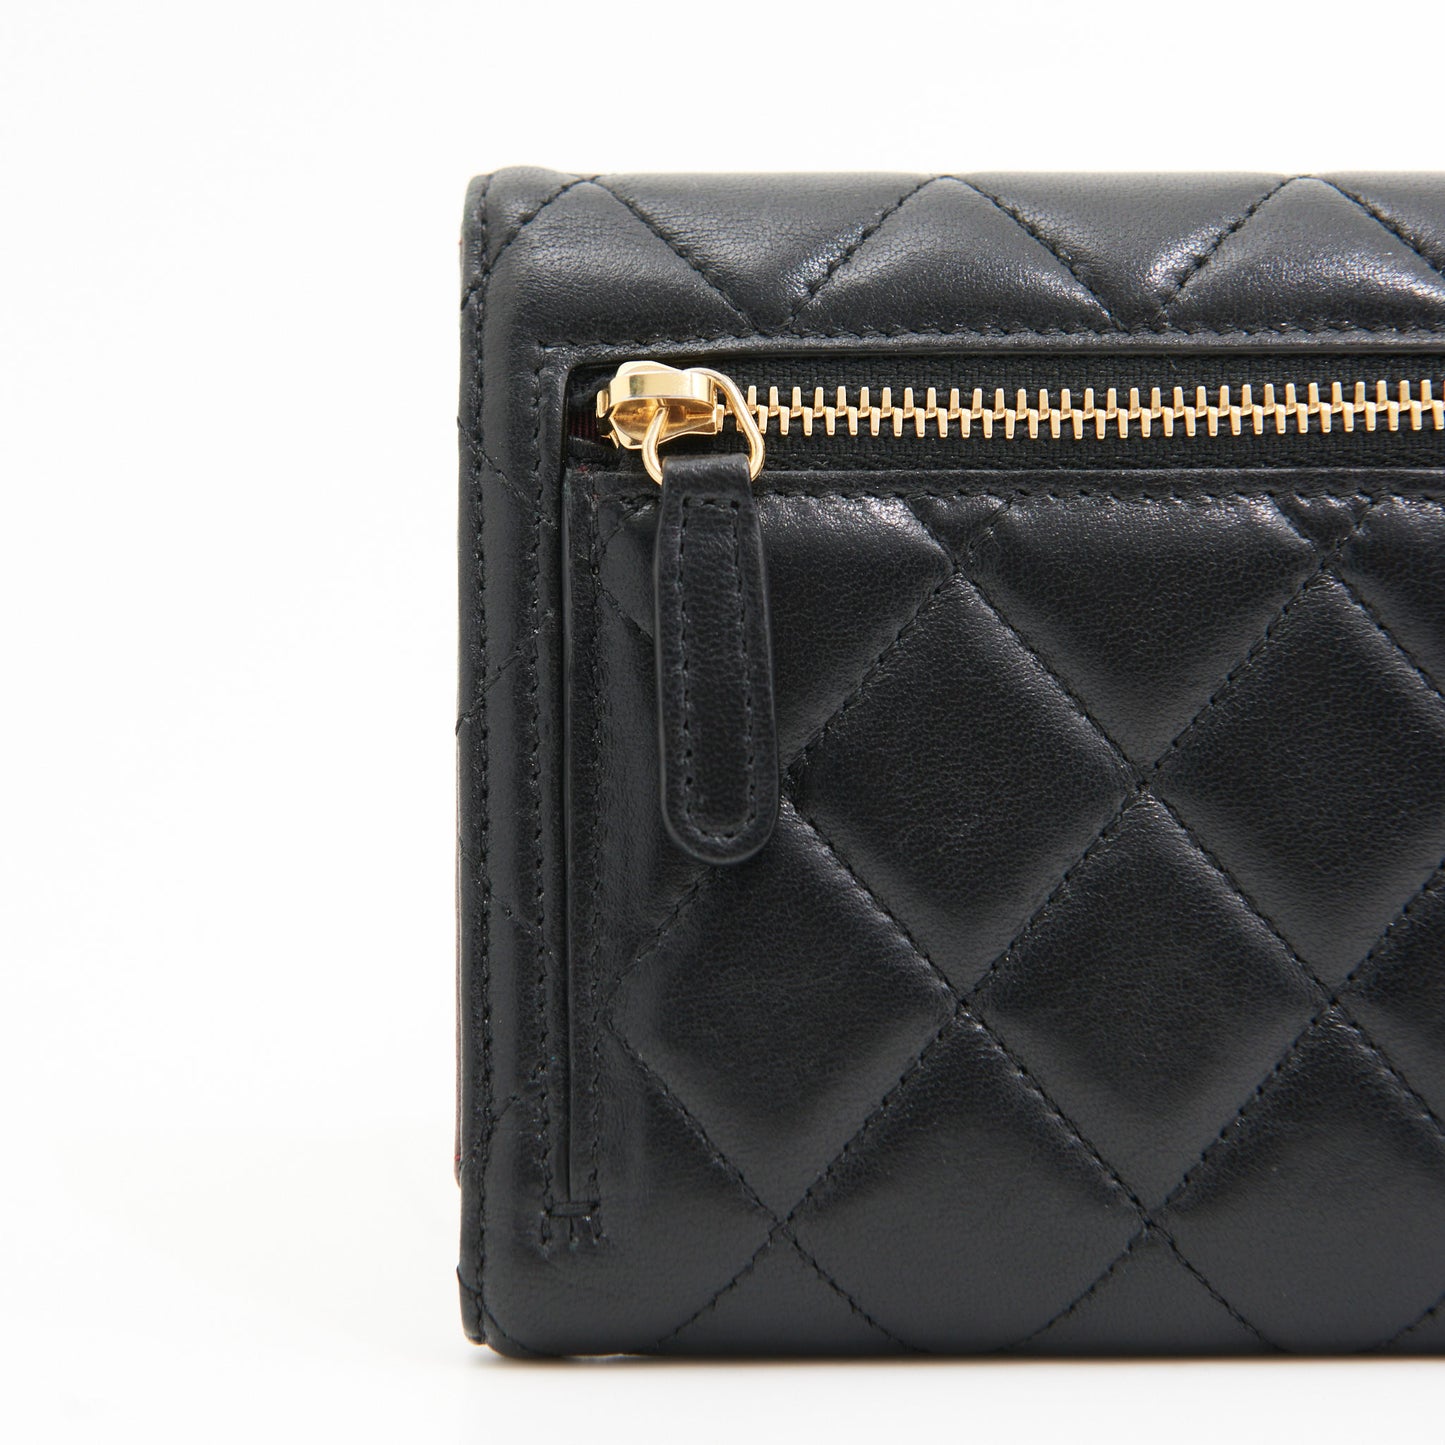 Chanel Lambskin Quilted Wallet in Black GHW